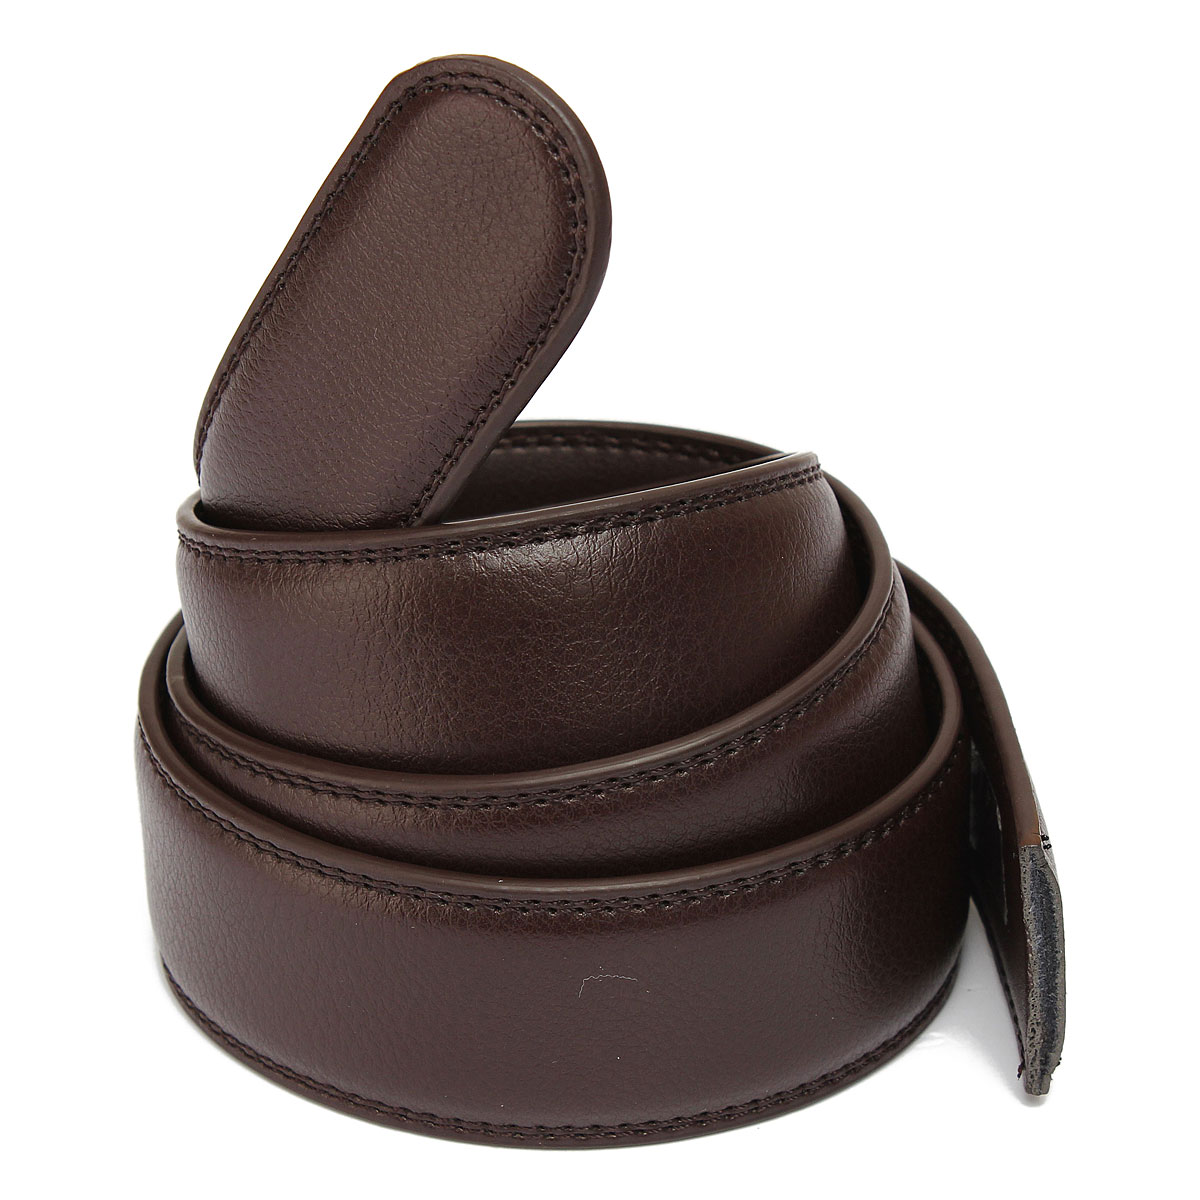 Men-Second-Floor-Cowhide-Black-Brown-Business-Leather-Belt-Body-Without-Buckle-Length-Randomly-1041659